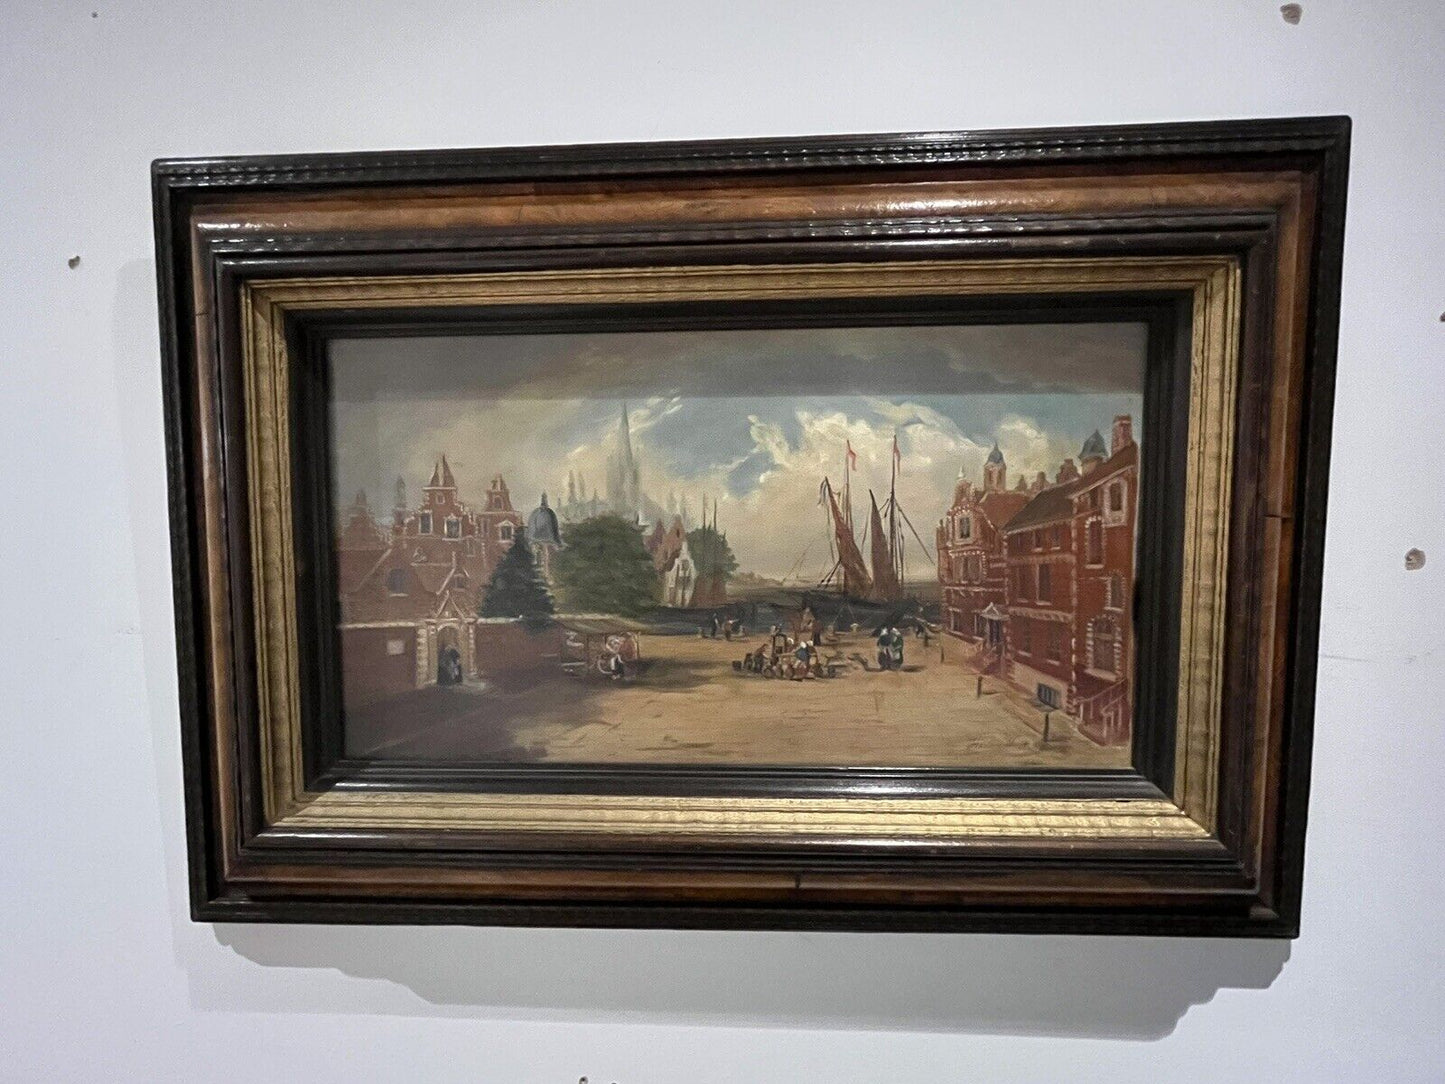 Antique Dutch Canal Scene Oil Painting, Signed F Knot In Frame